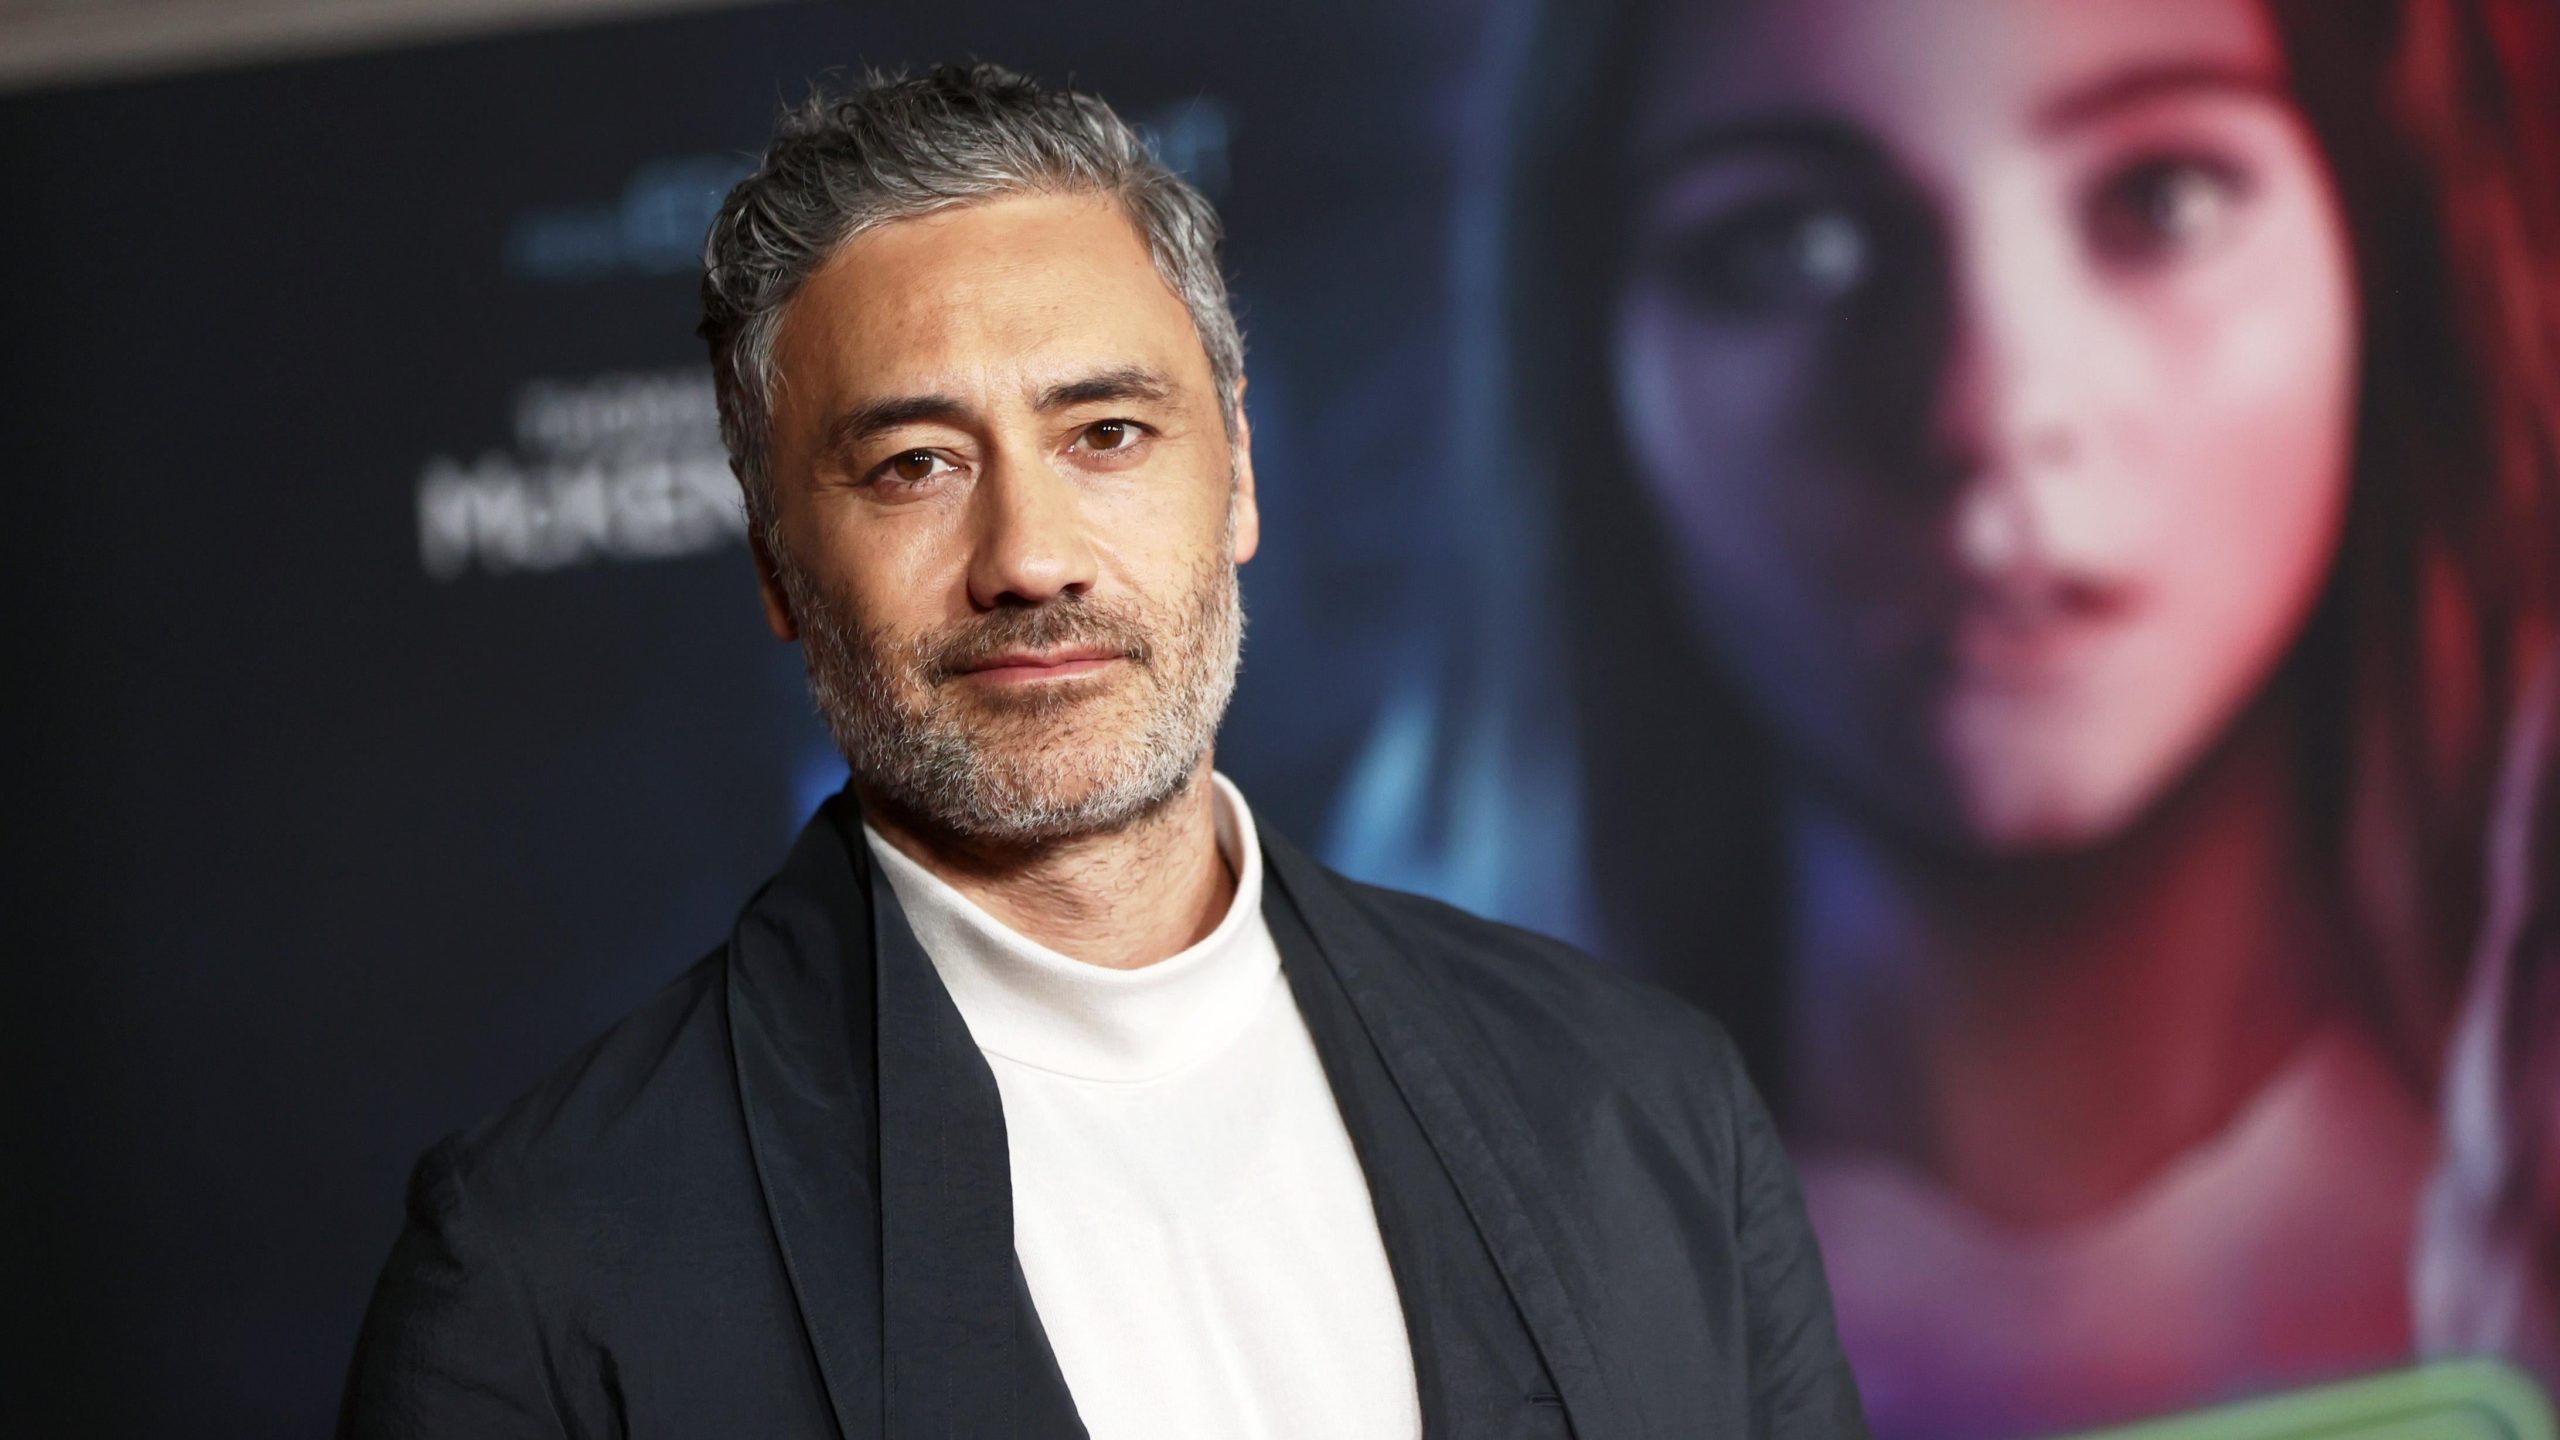  Taika Waititi attends the premiere of Last Night in Soho at the Academy Museum of Motion Pictures in Los Angeles, California. (Photo: Matt Winkelmeyer/Getty Images for Critics Choice Association, Getty Images)